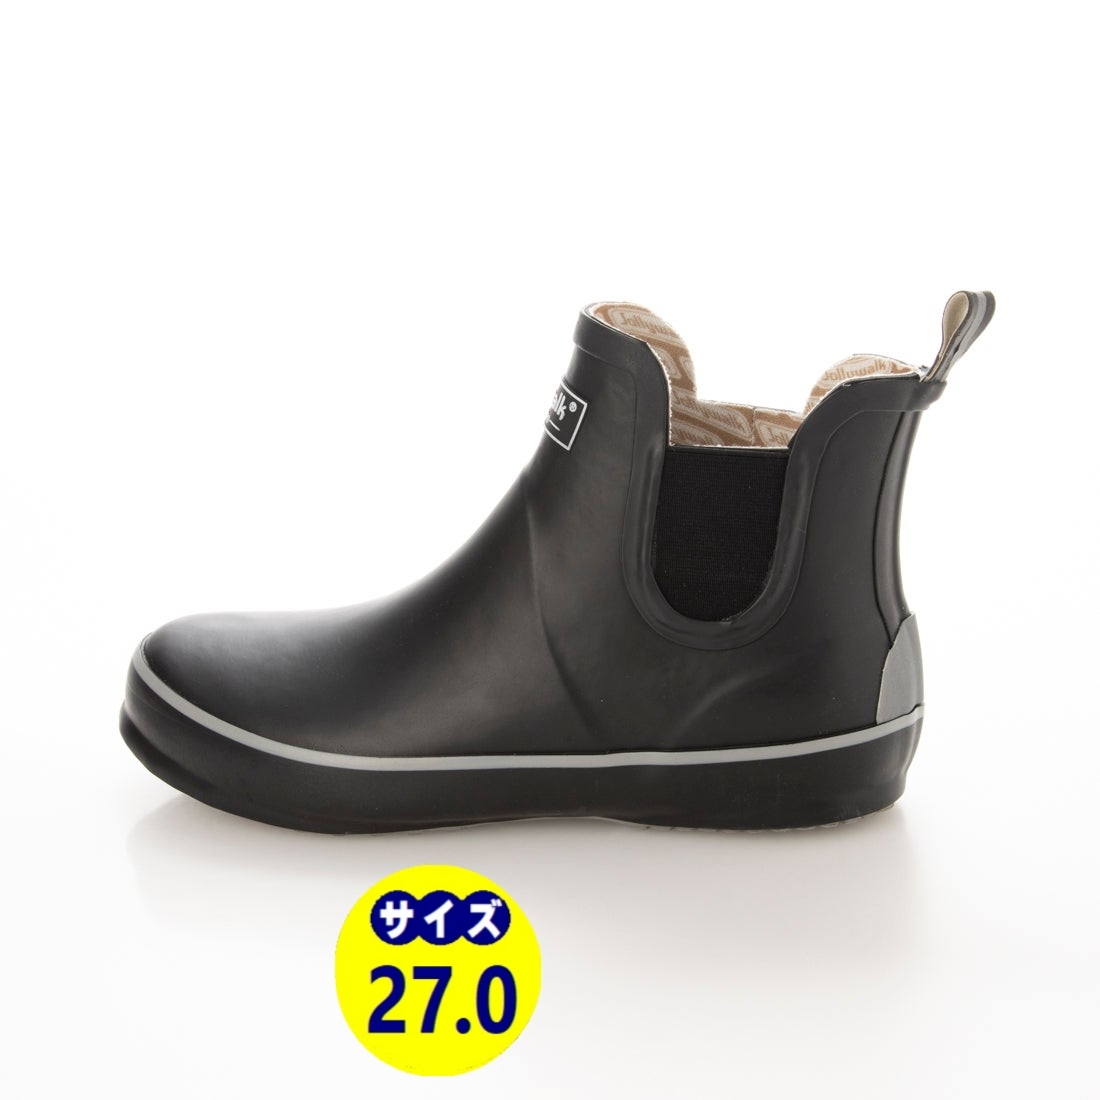  men's rain boots rain shoes boots rain shoes natural rubber material new goods [20088-BLK-GRY-270]27.0cm stock one . sale 